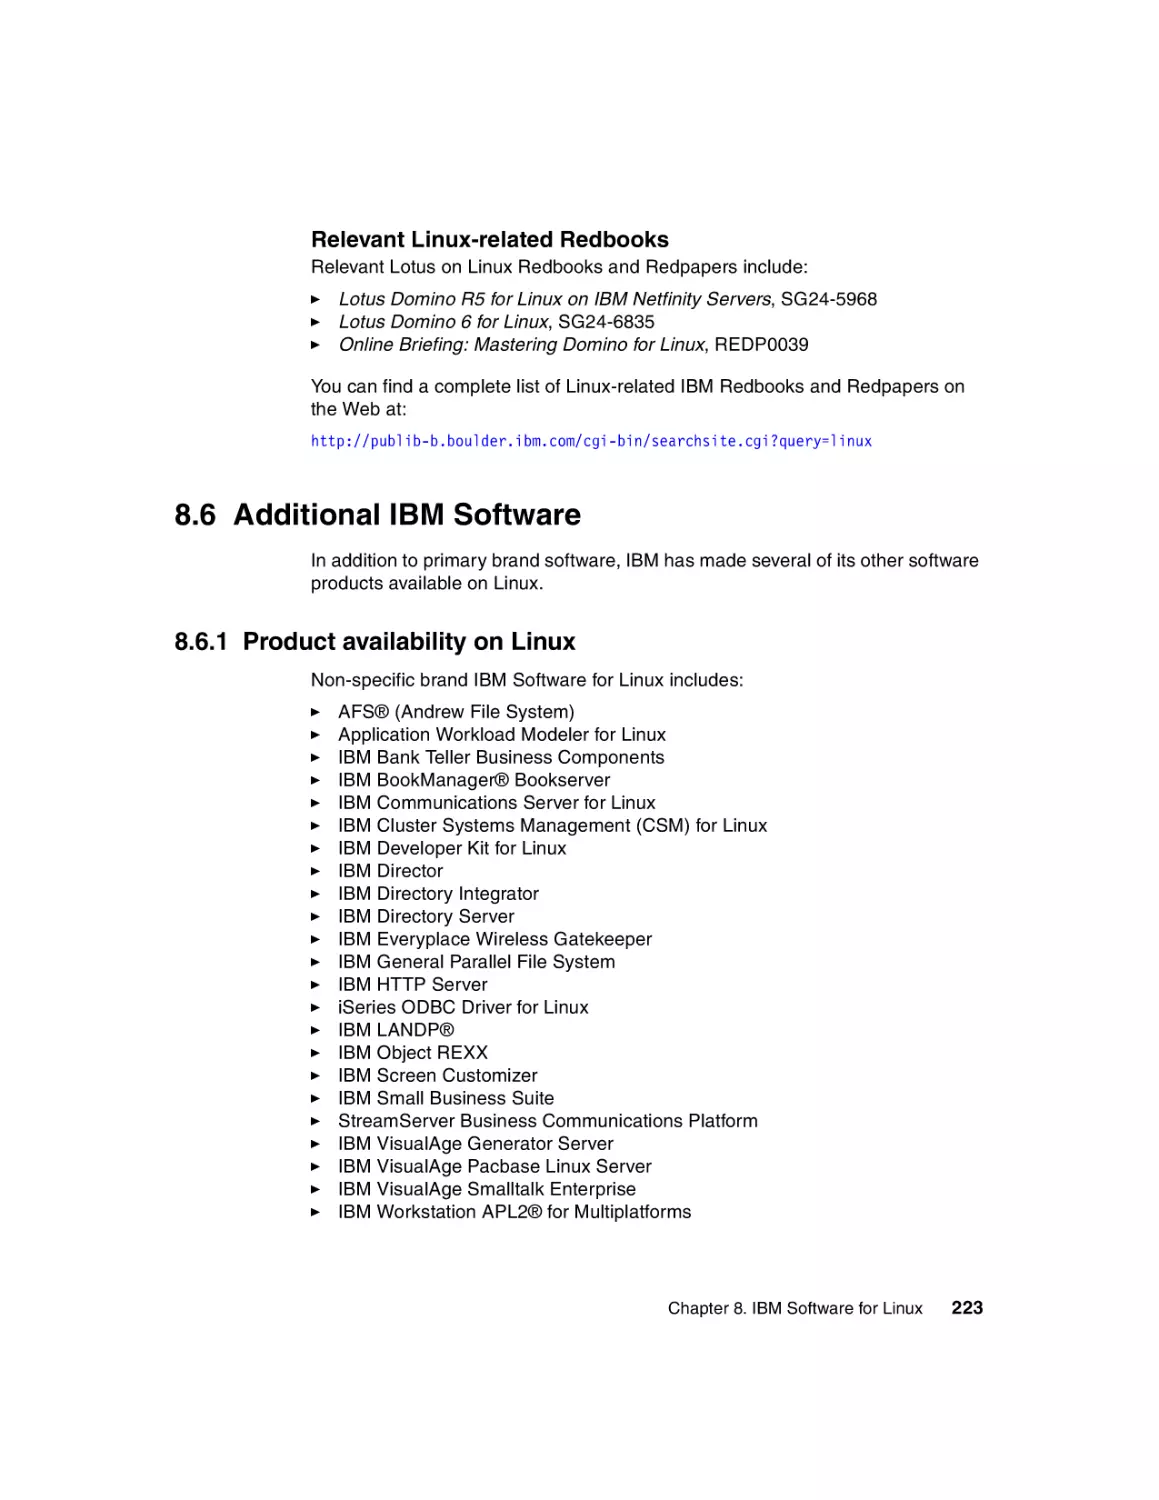 8.6 Additional IBM Software
8.6.1 Product availability on Linux